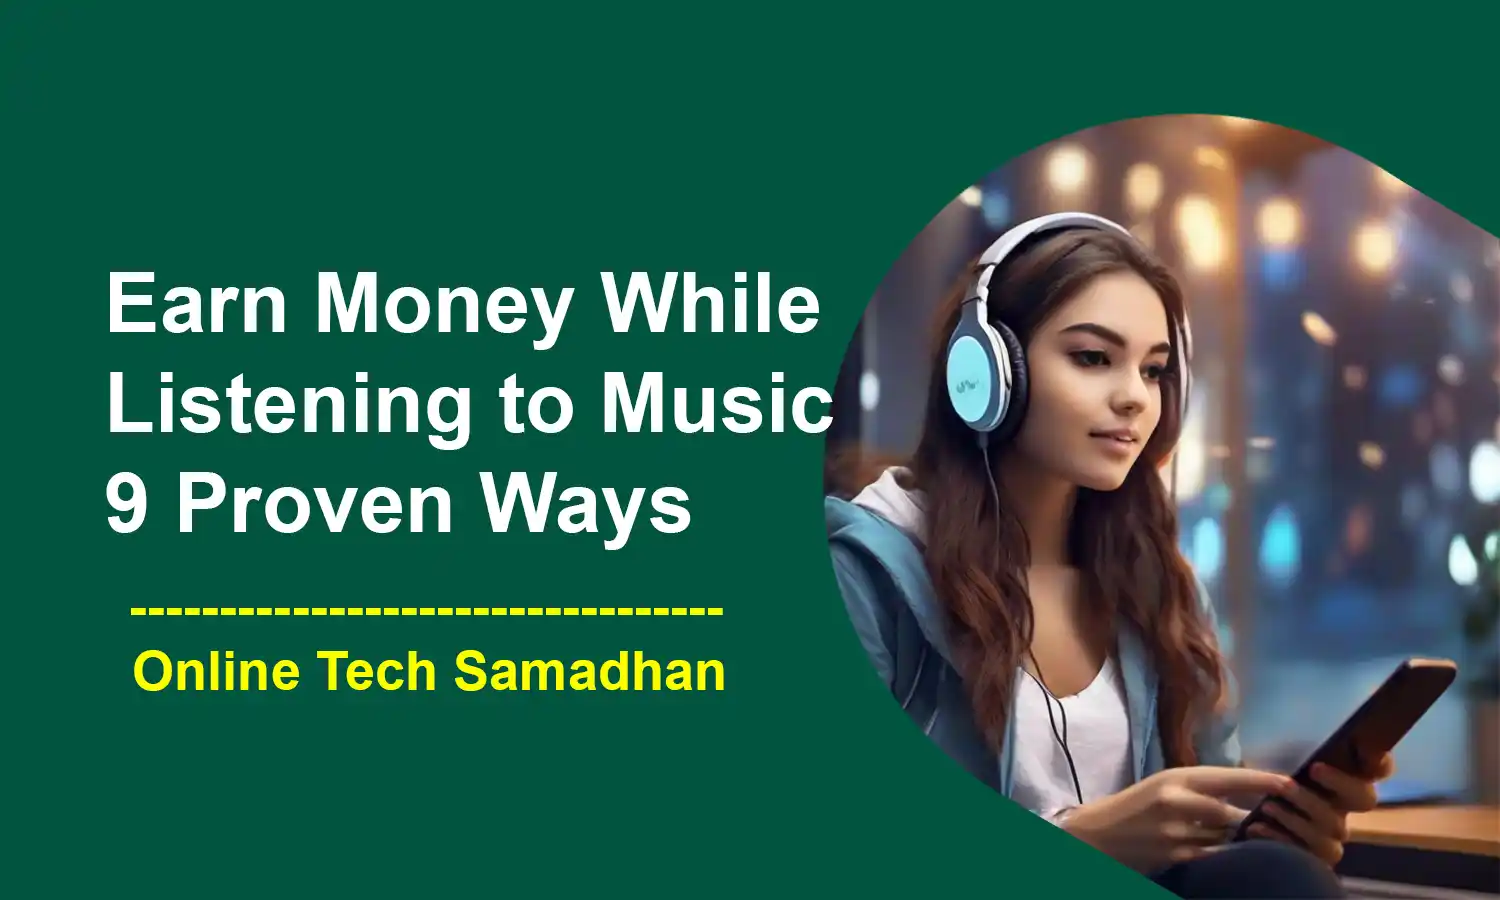 Earn Money While Listening to Music